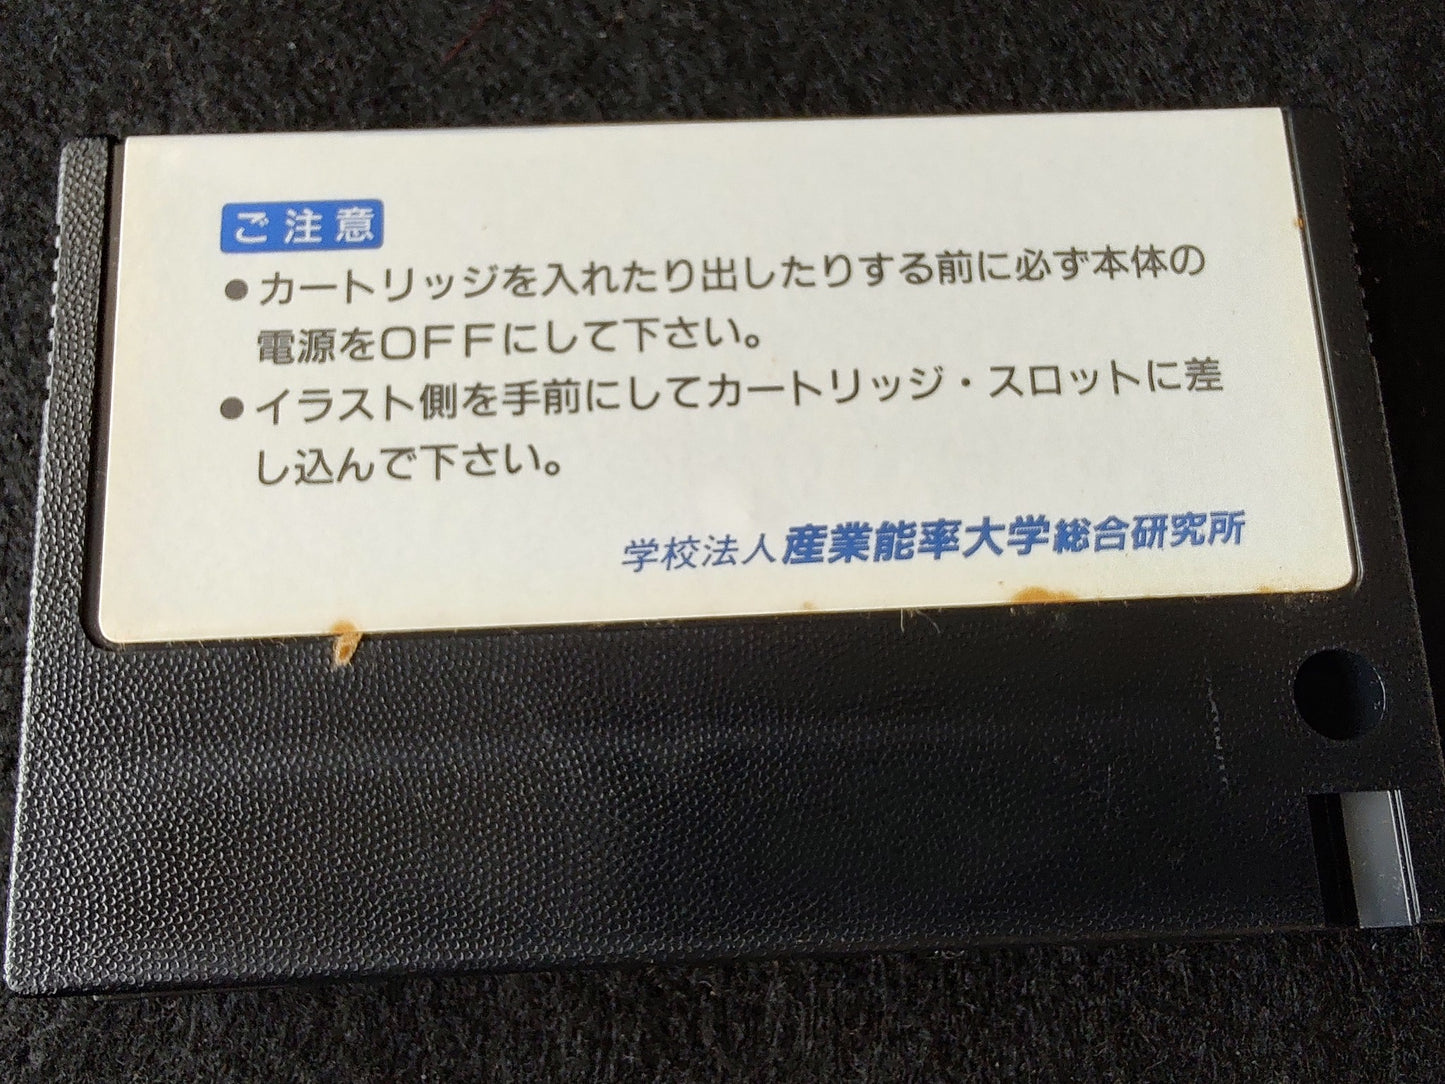 SANNO CG for MSX /Game Cartrigde only/NTSC-J working-f0730-